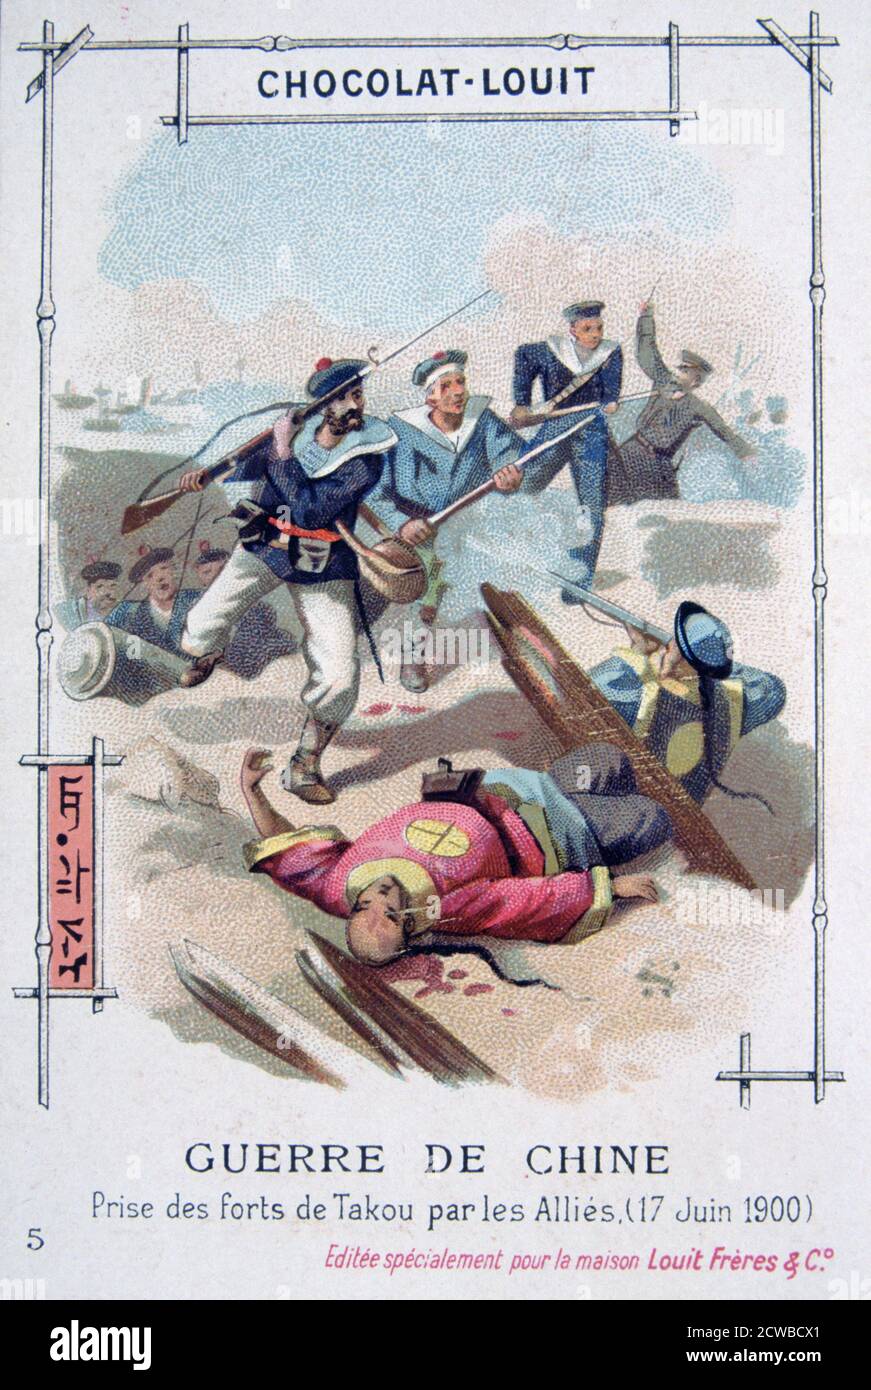 Attack on the forts of Taku by the Allies, Boxer Rebellion, China, 17 June 1900. The Boxer Uprising or Boxer Rebellion was a Chinese rebellion from November 1899 to September 7, 1901 against foreign influence in trade, politics, religion and technology in China during the final years of the Qing Dynasty. The assassination of the German ambassador and the siege of foreign diplomatic legations in Peking prompted Britain, France, Germany, the US, Russia, Japan, Italy and Austria-Hungary to form the Eight Nation Alliance and intervene militarily. French trading card advertising Chocolat-Louit. The Stock Photo